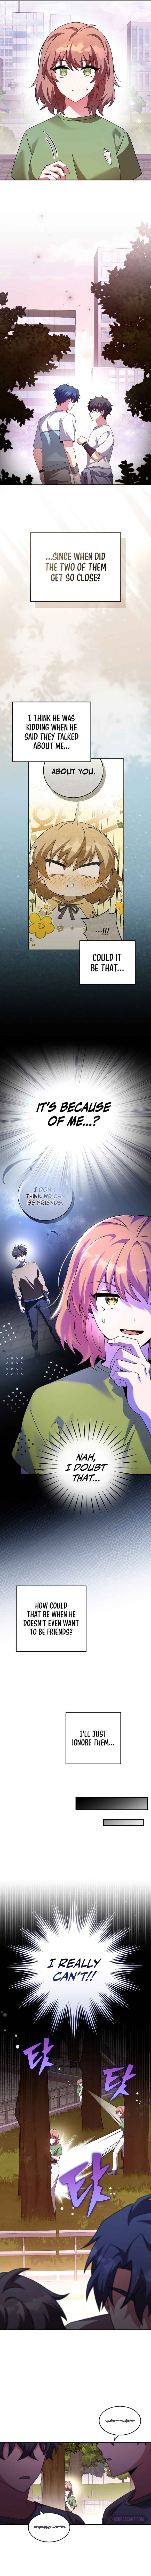 The Novel’s Extra (Remake) chapter 75